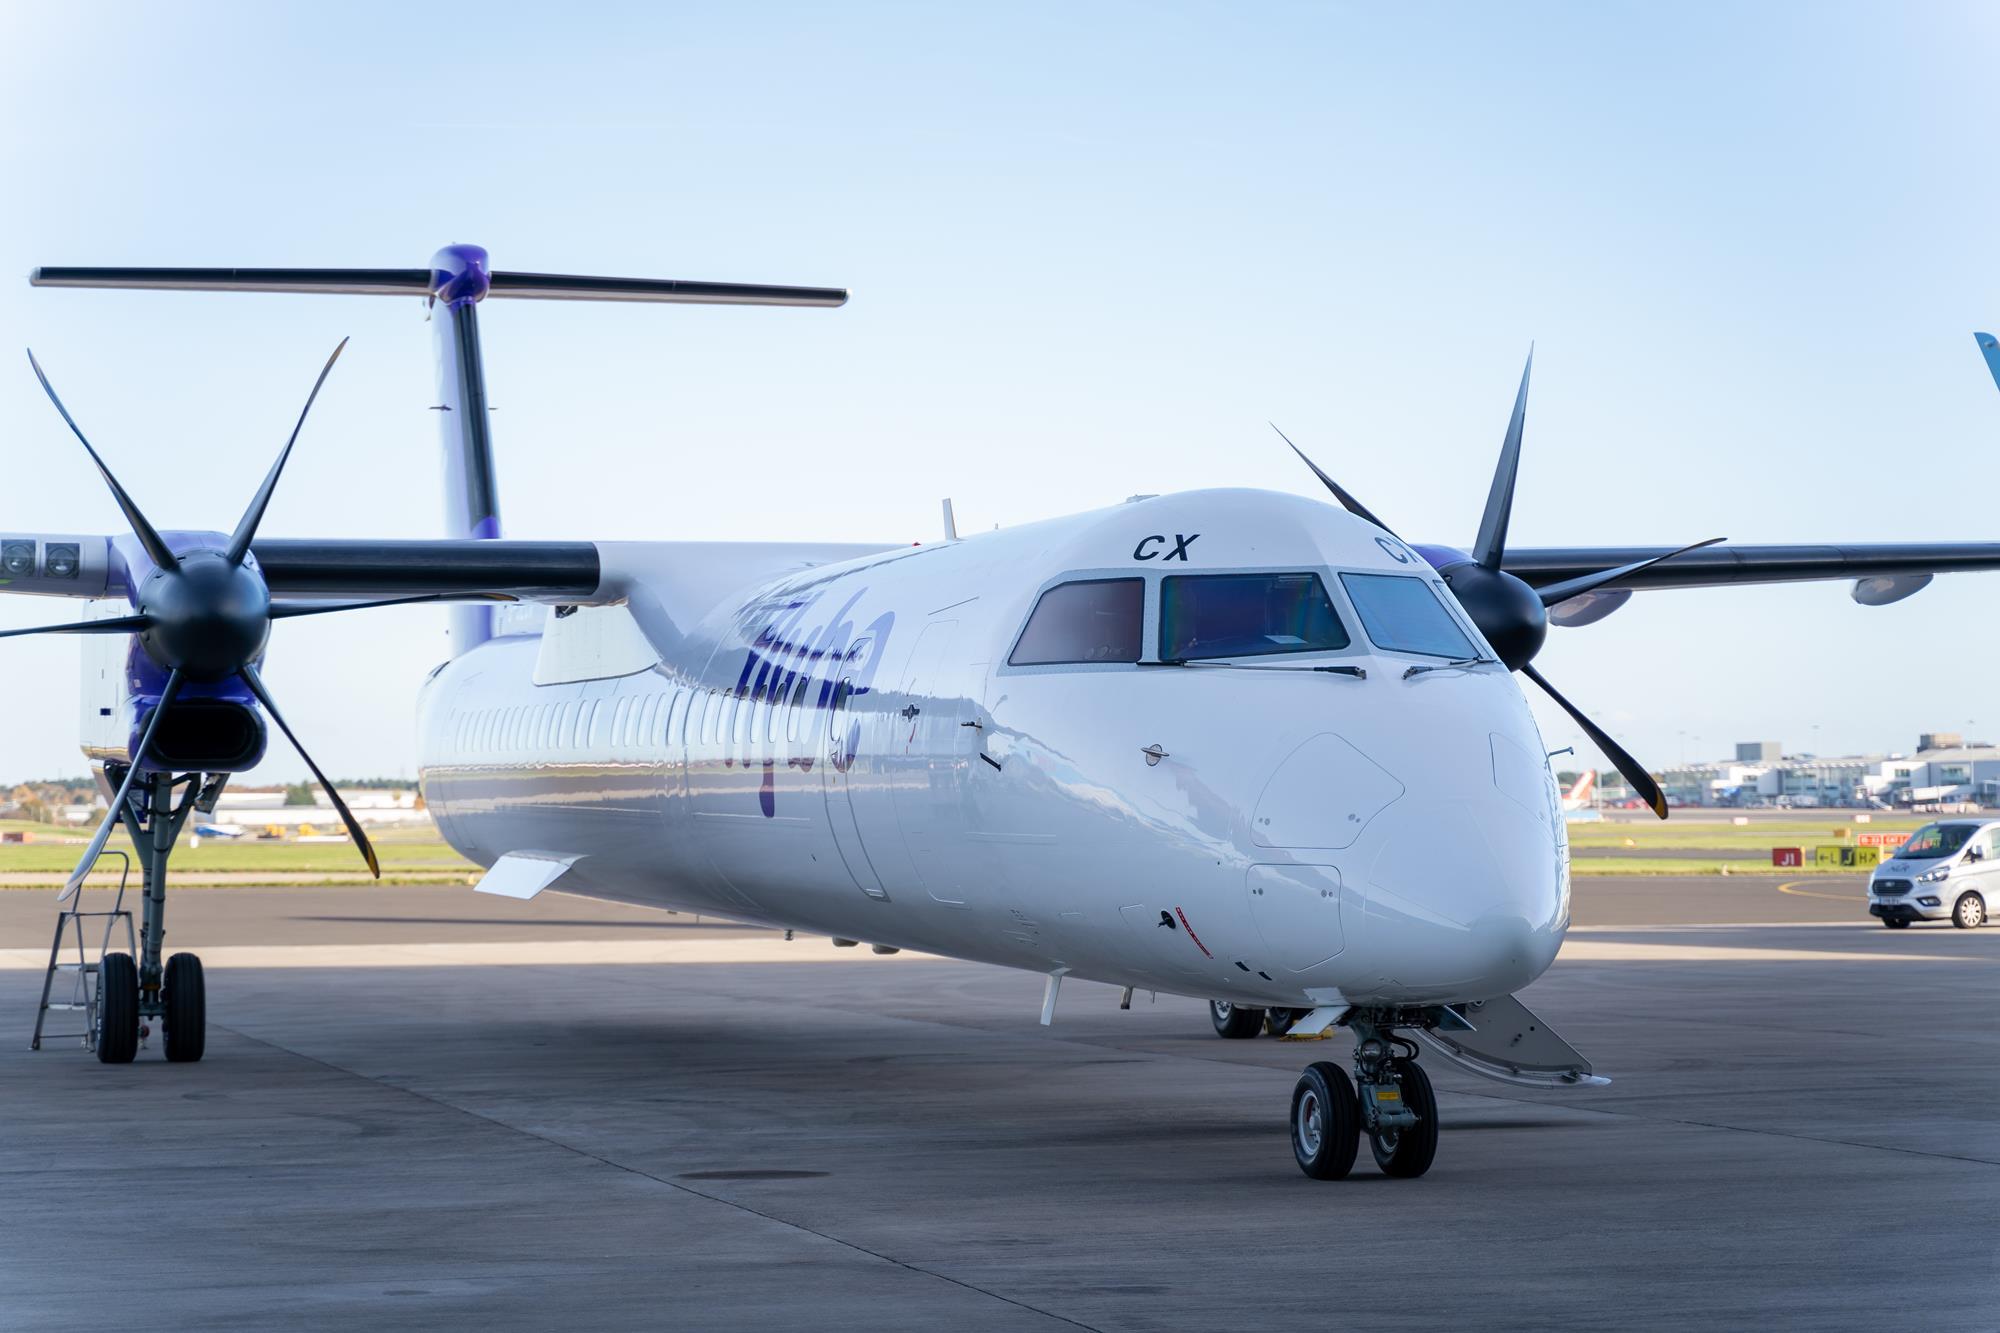 uk regional carrier flybe grounded as it appoints administrators | news | flight global